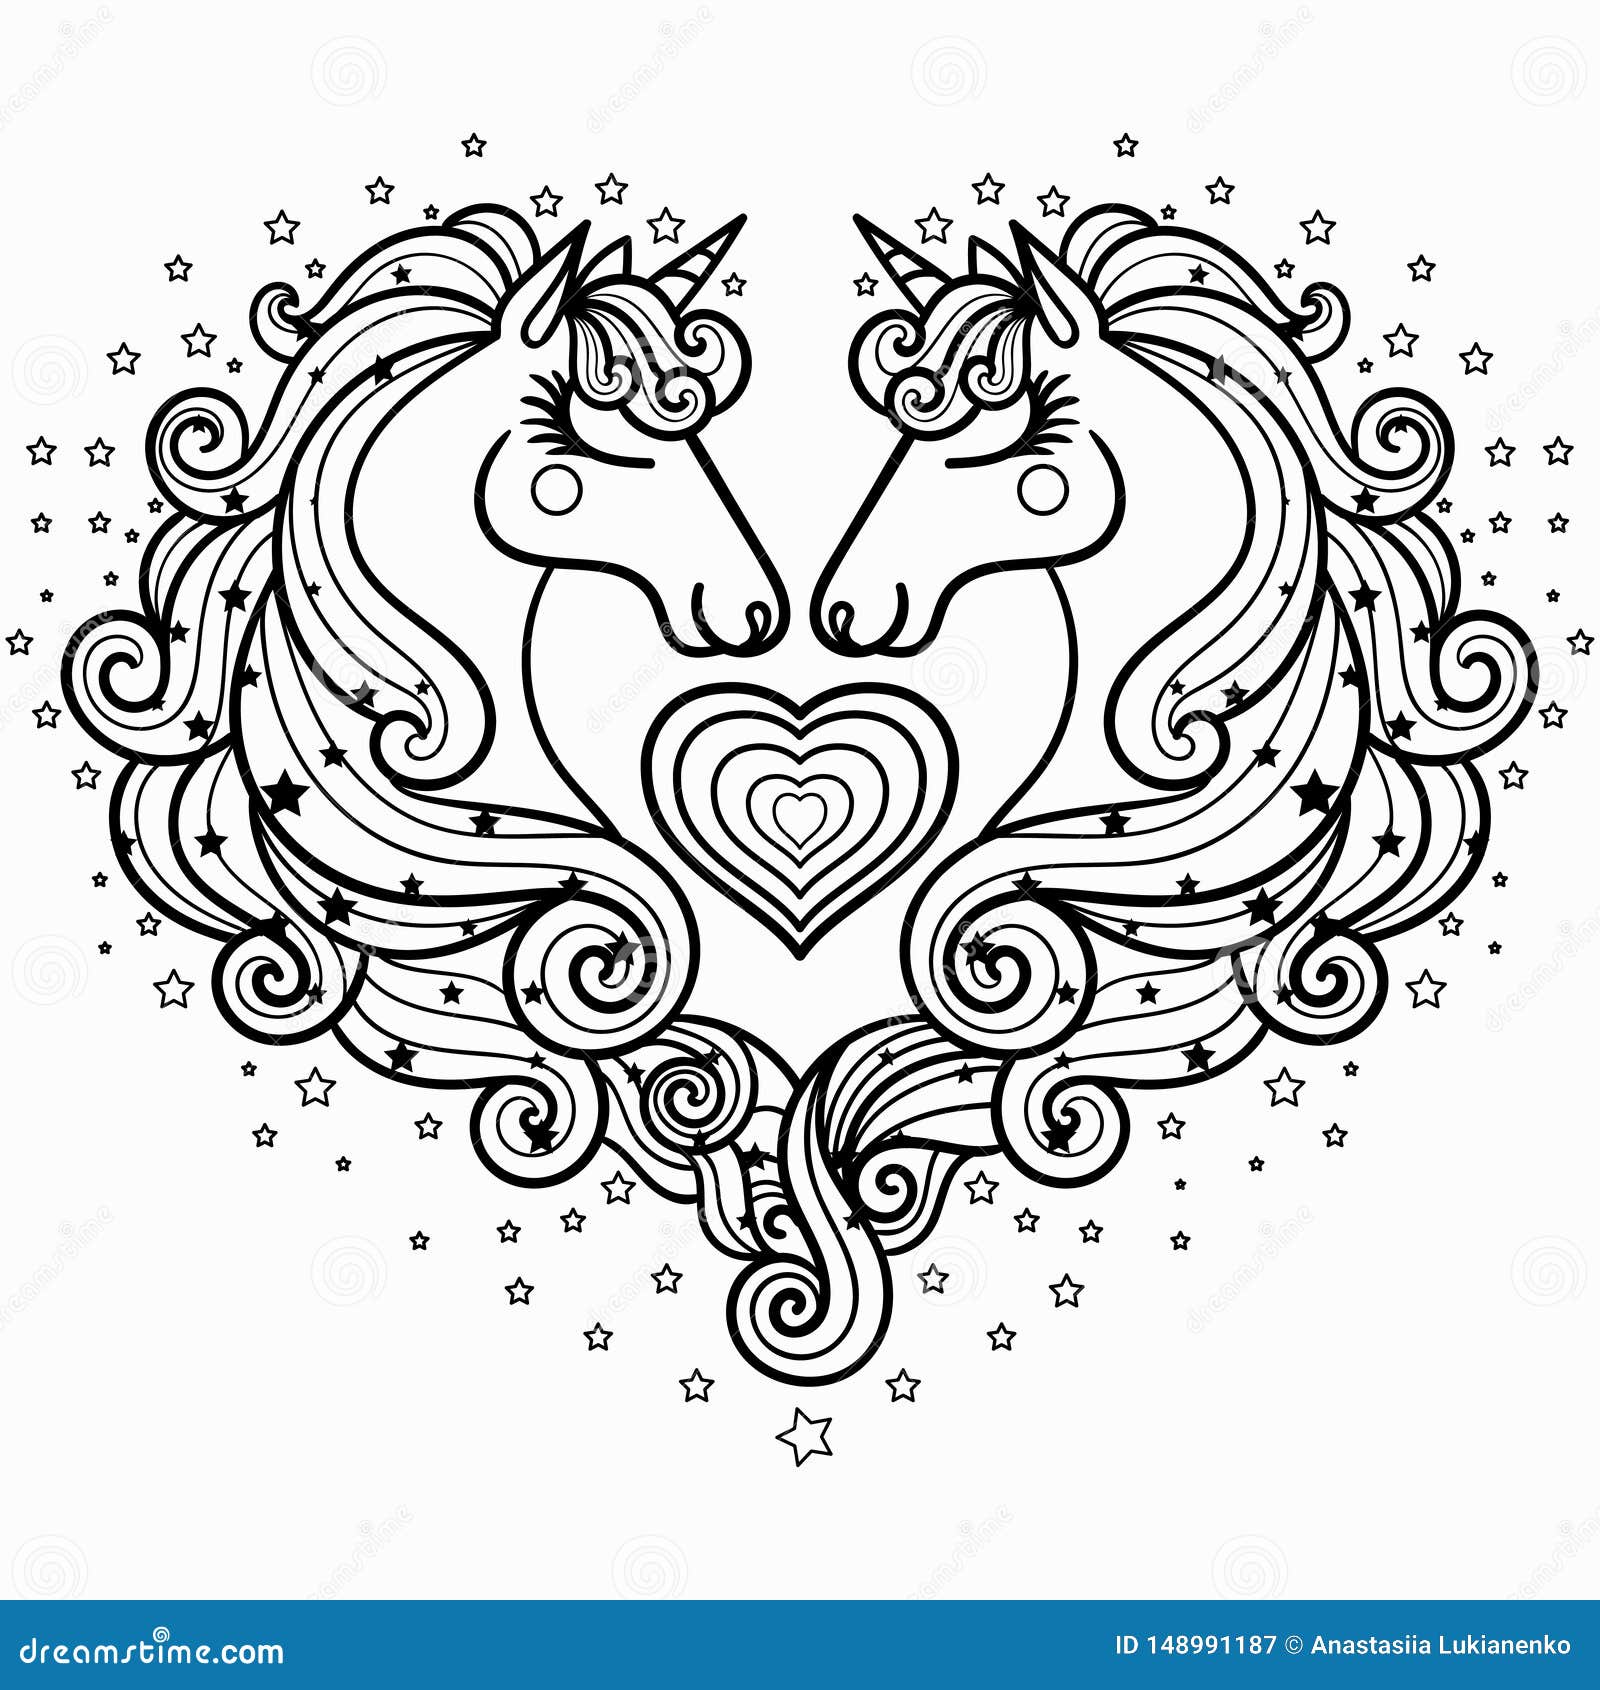 Two Unicorns With A Long Mane The Magical Animal Black And White Coloring Pages For Adults And Children Stock Vector Illustration Of Fairy Book 148991187